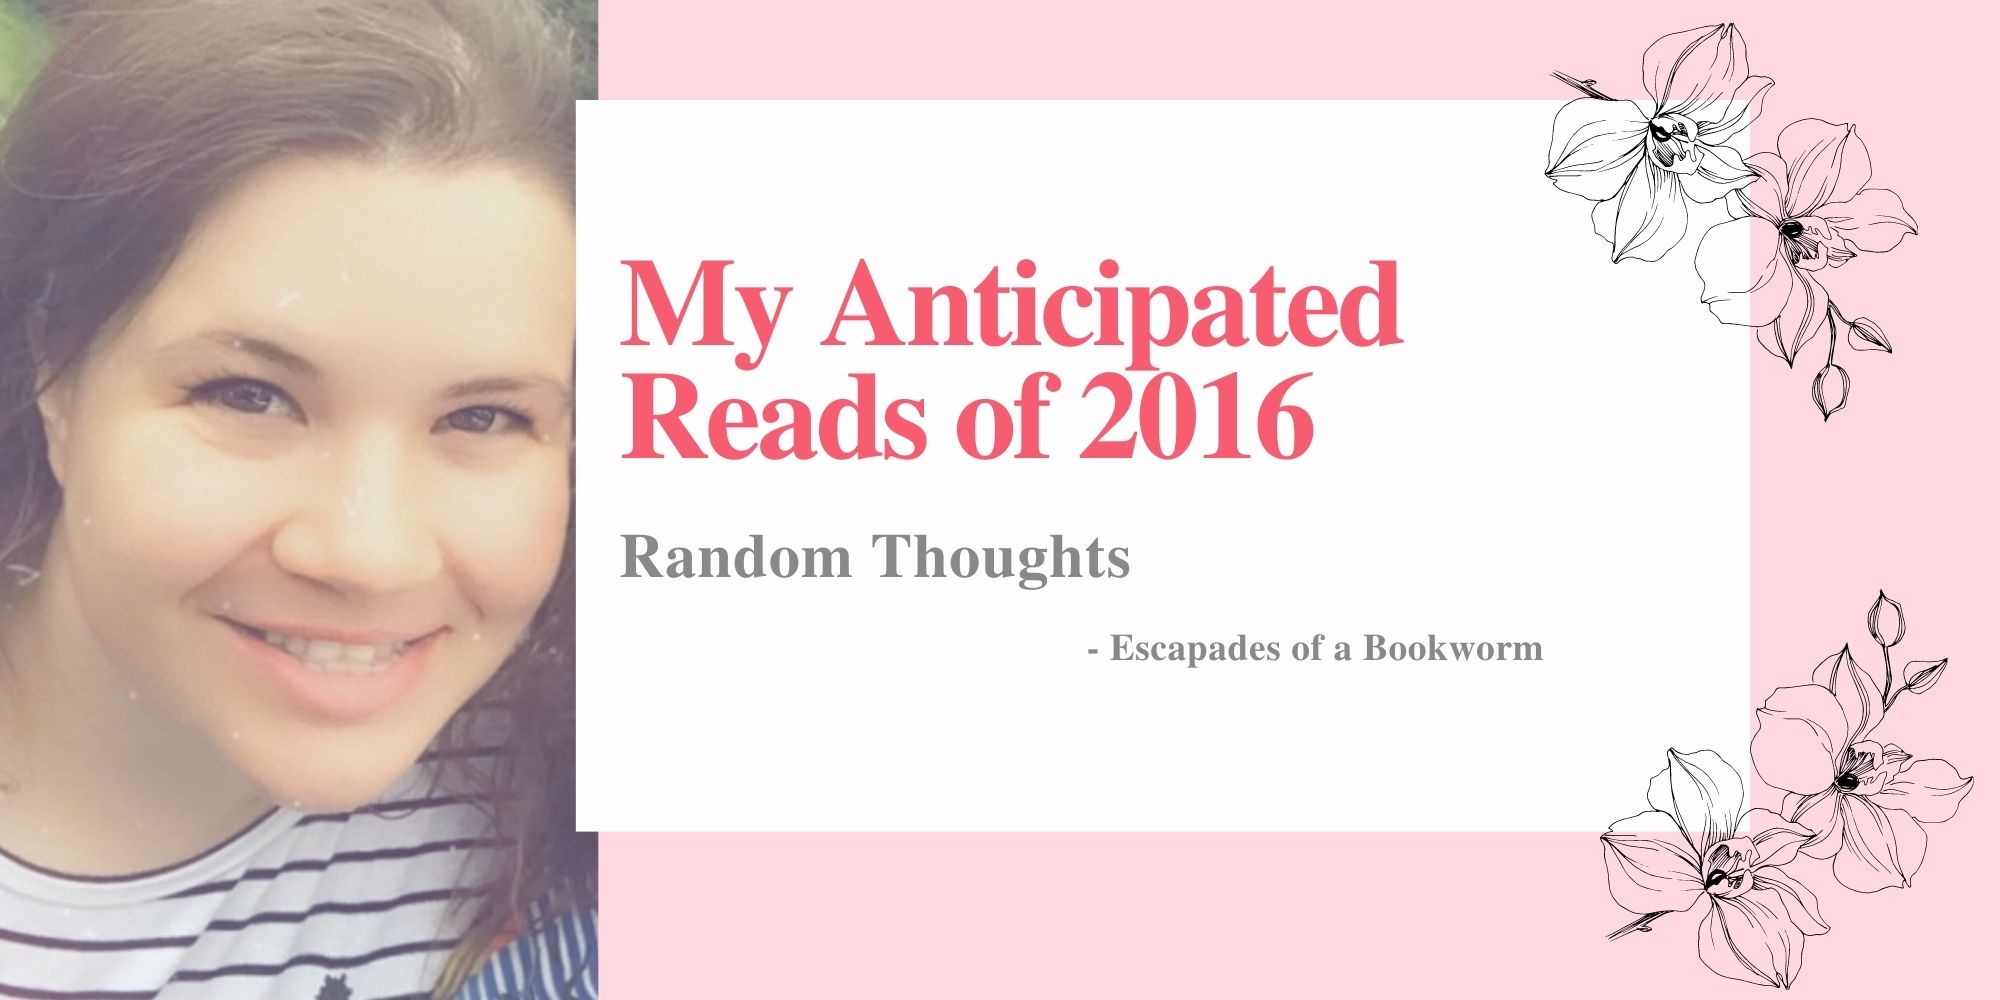 My Anticipated Reads of 2016